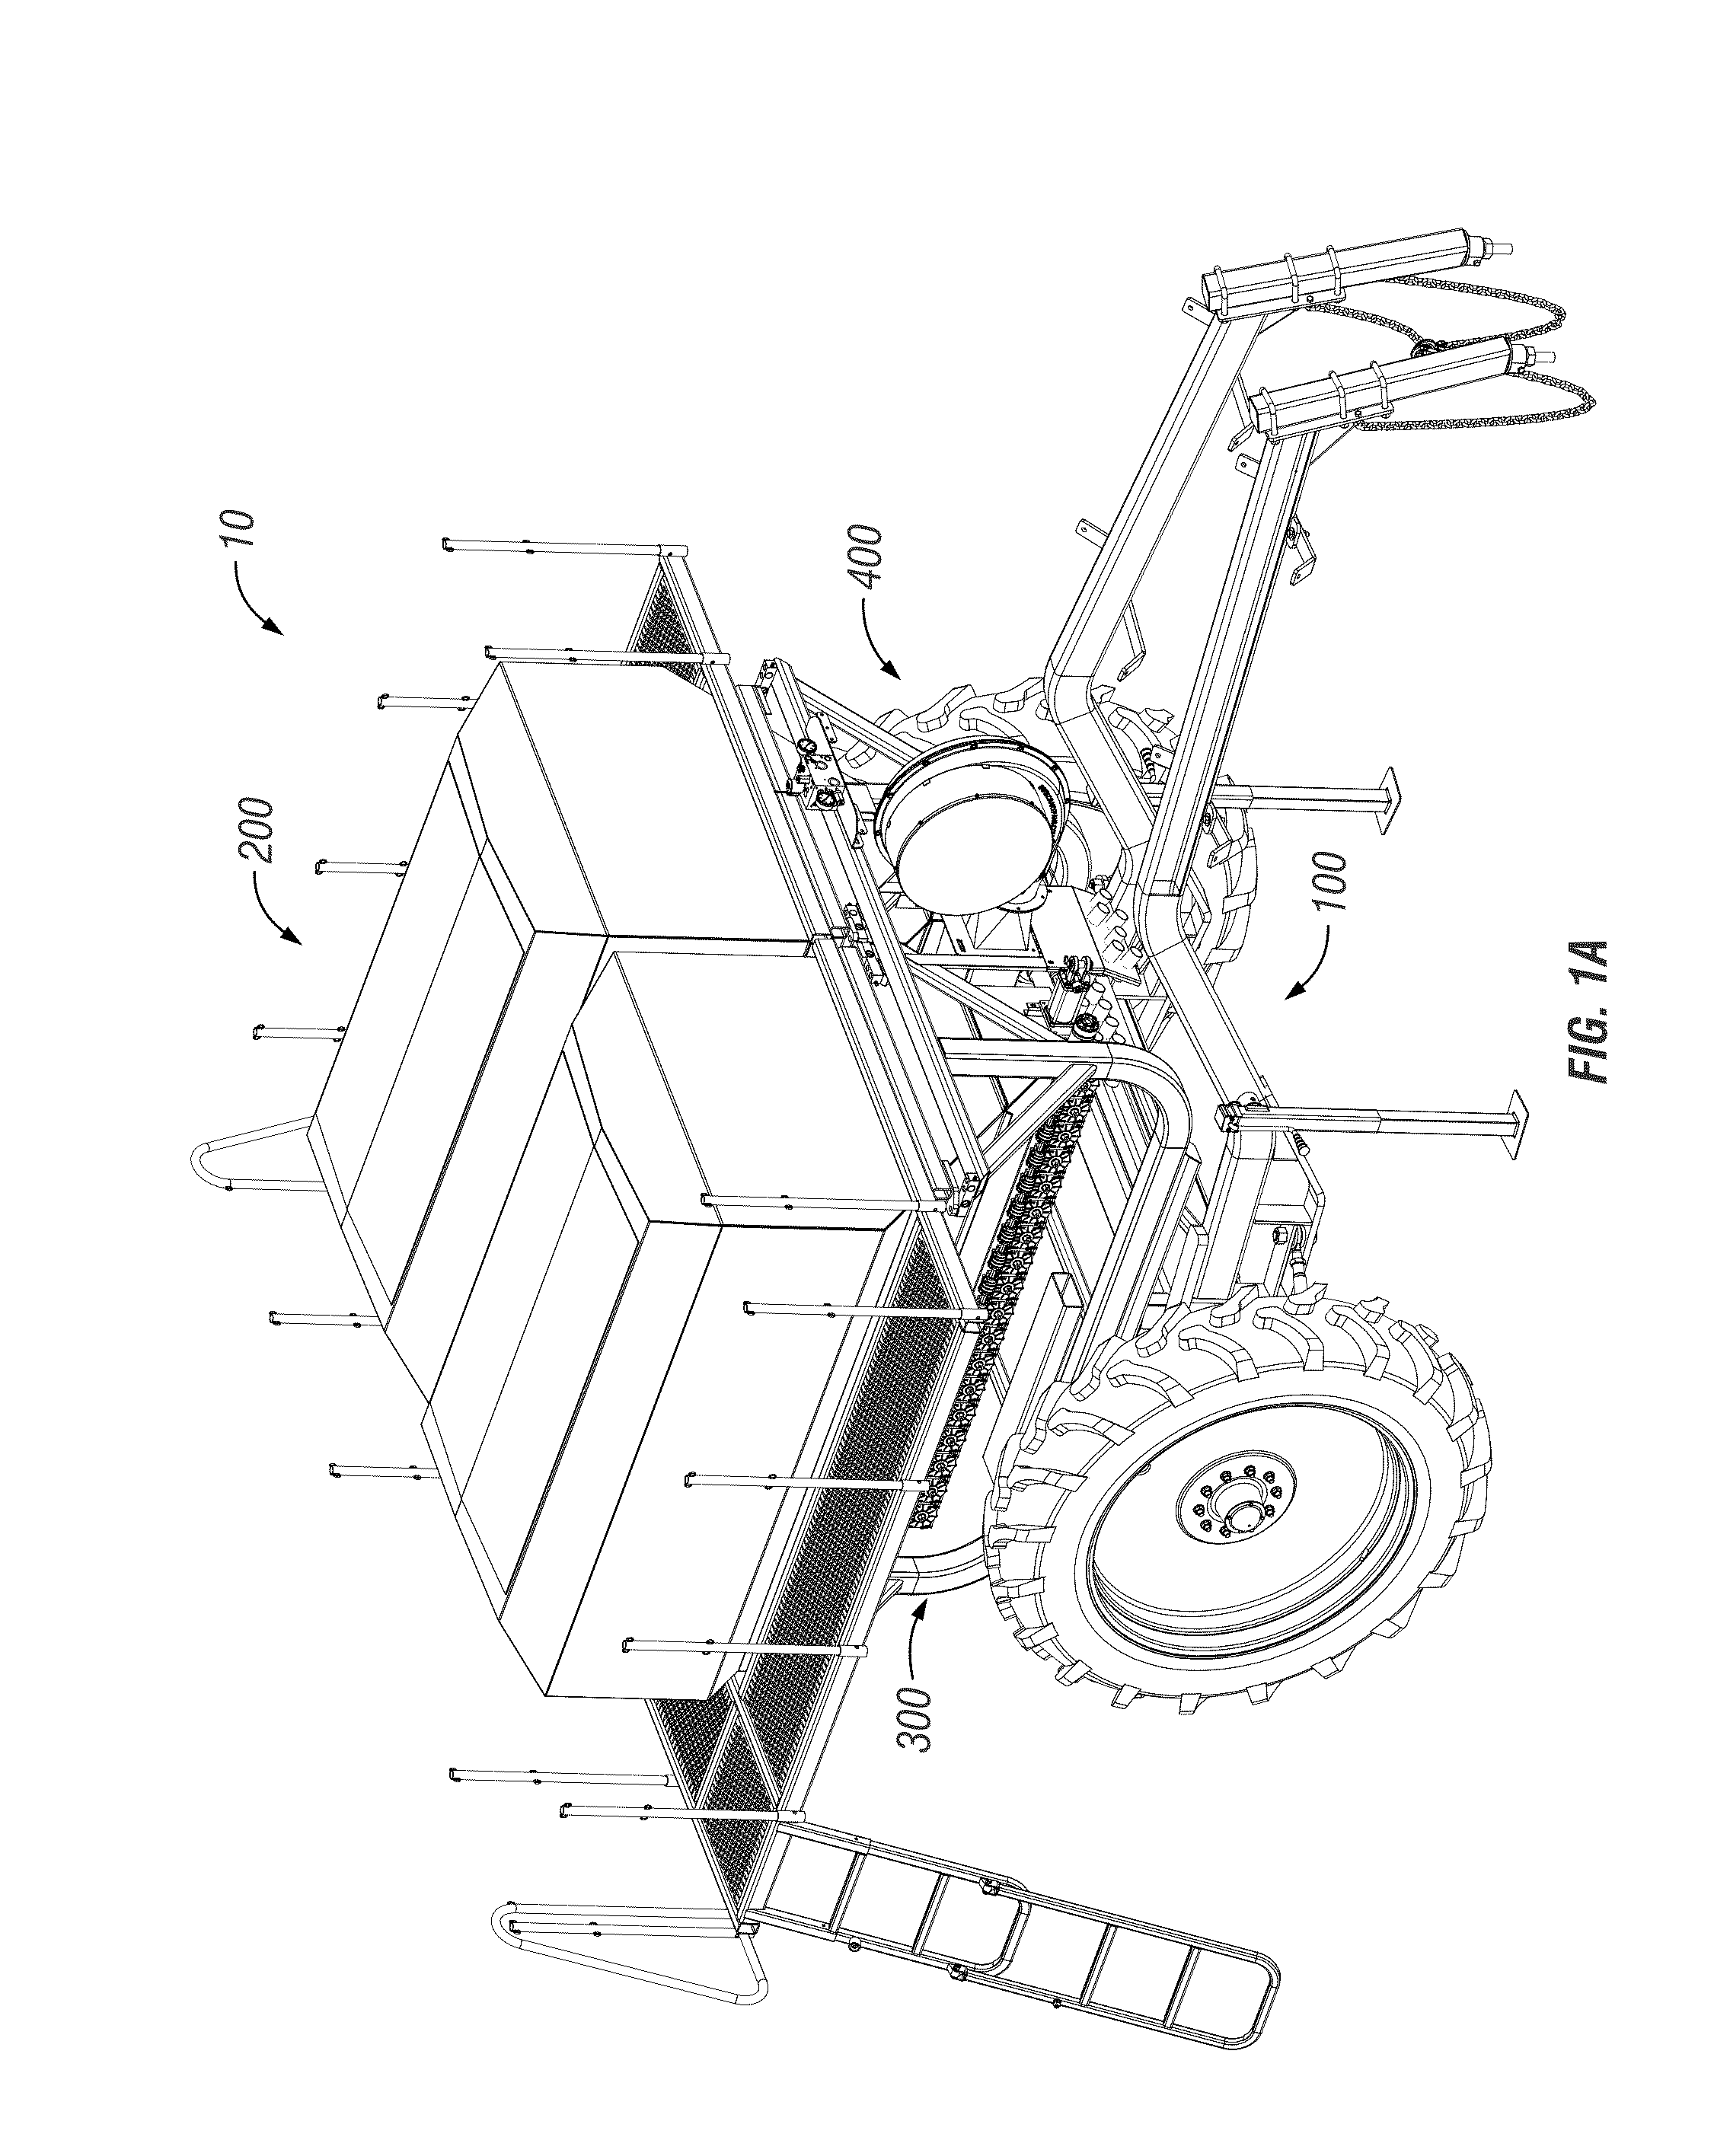 Metering system for solid particulate